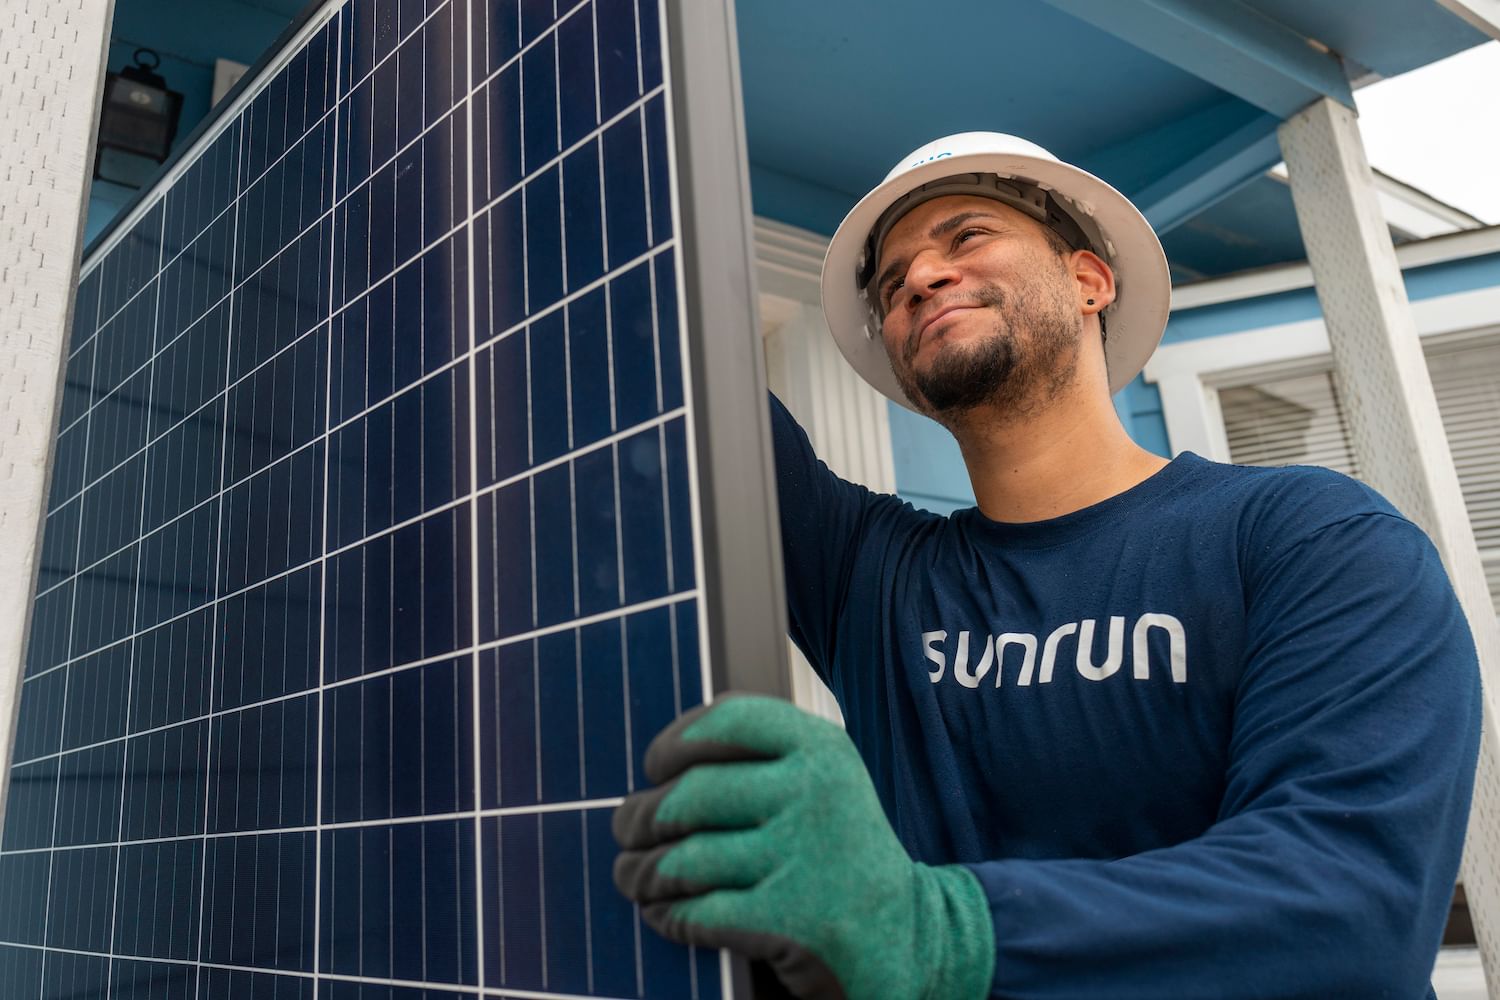 Puerto Rico’s first ever virtual solar power plant